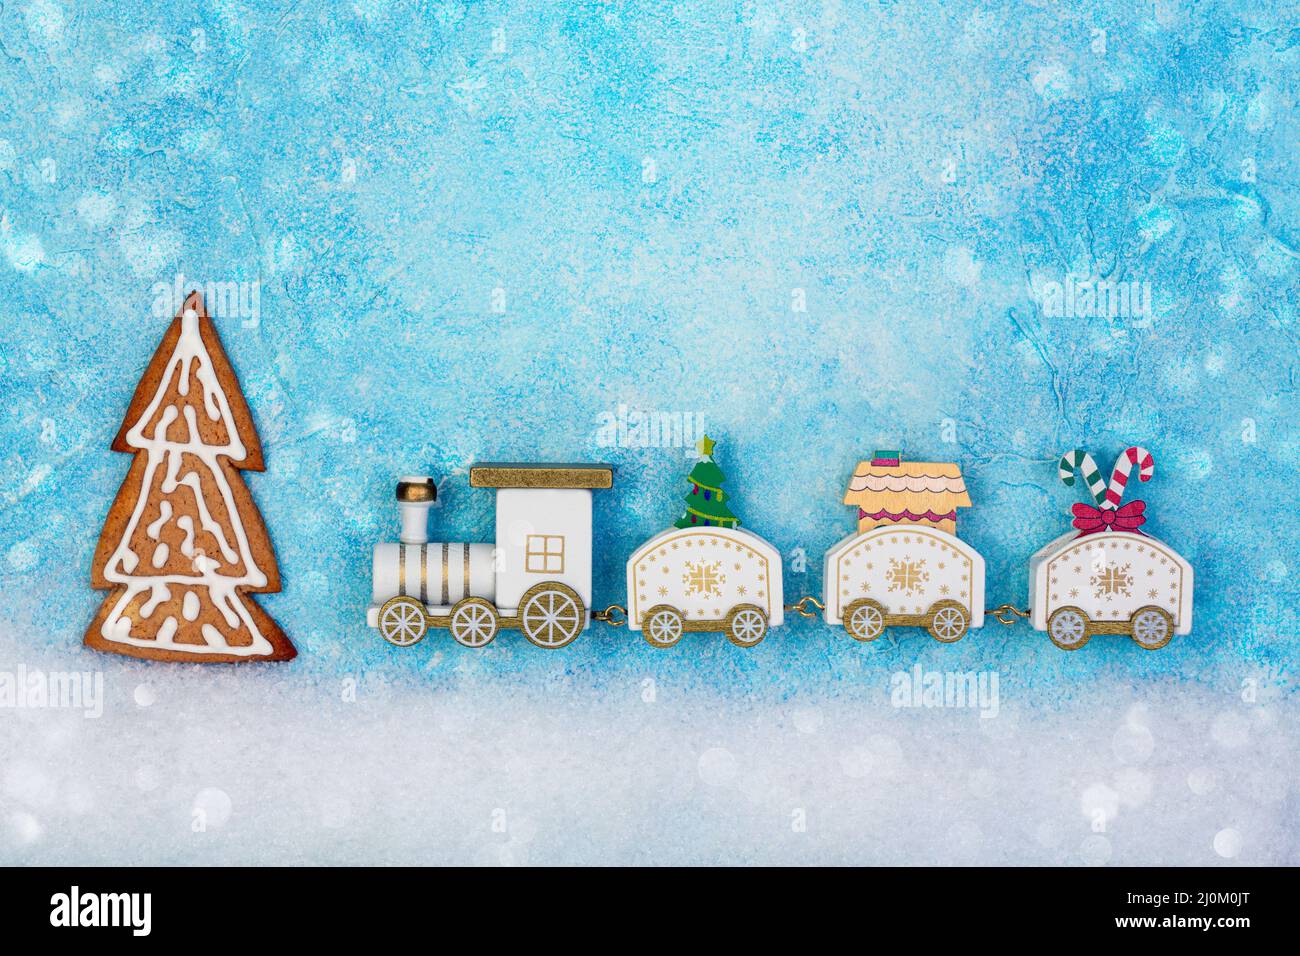 Christmas toy train with a Christmas tree and gifts. Stock Photo